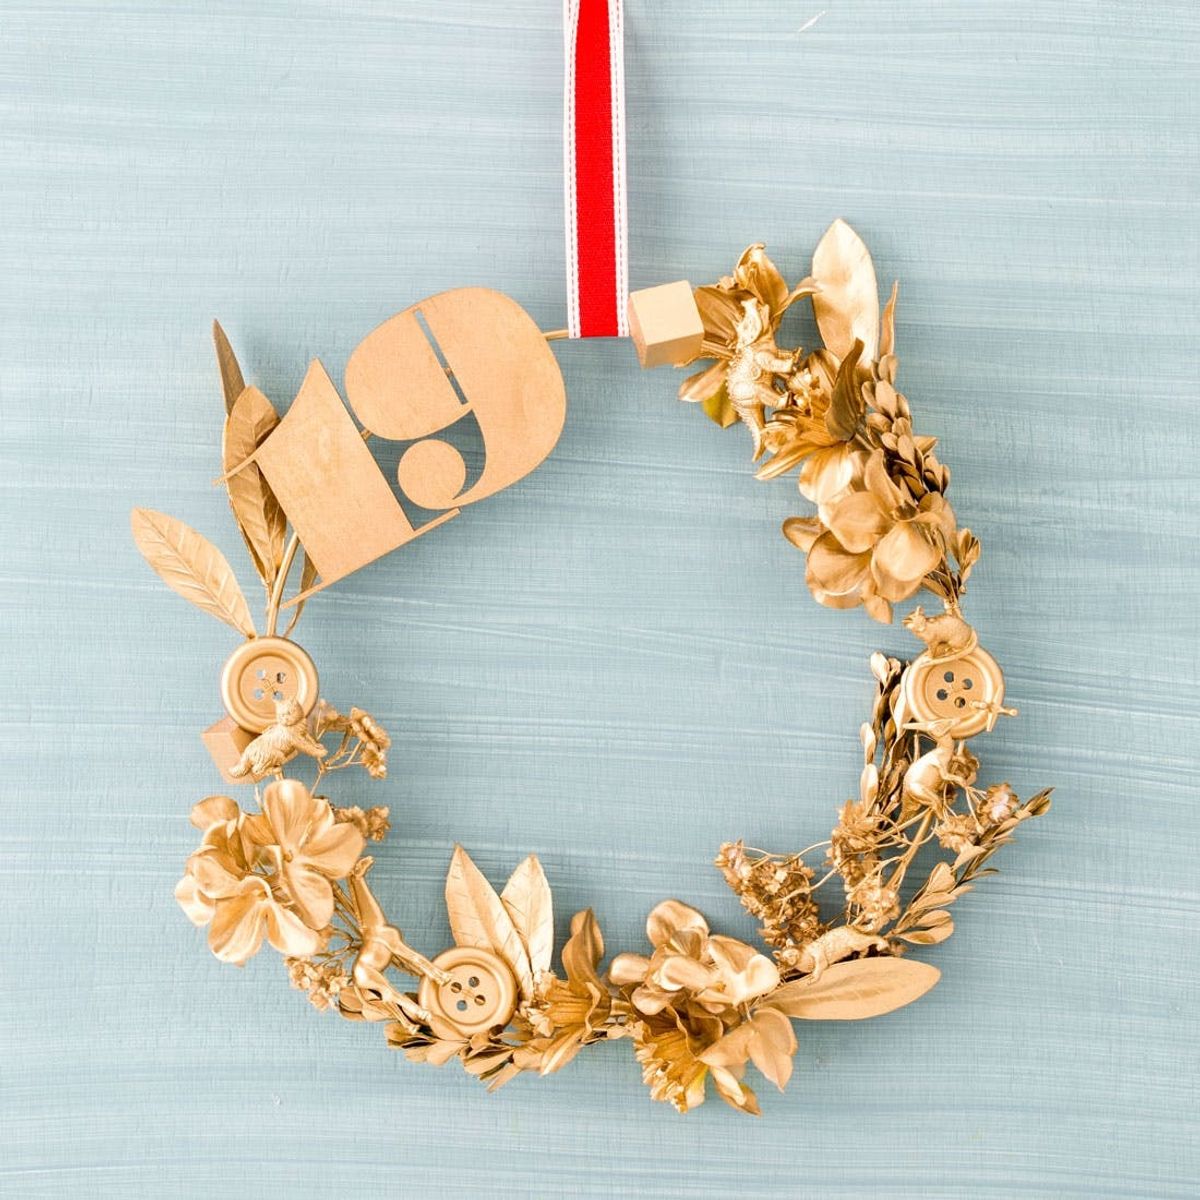 Your Neighbor Definitely Won’t Have This Christmas Wreath